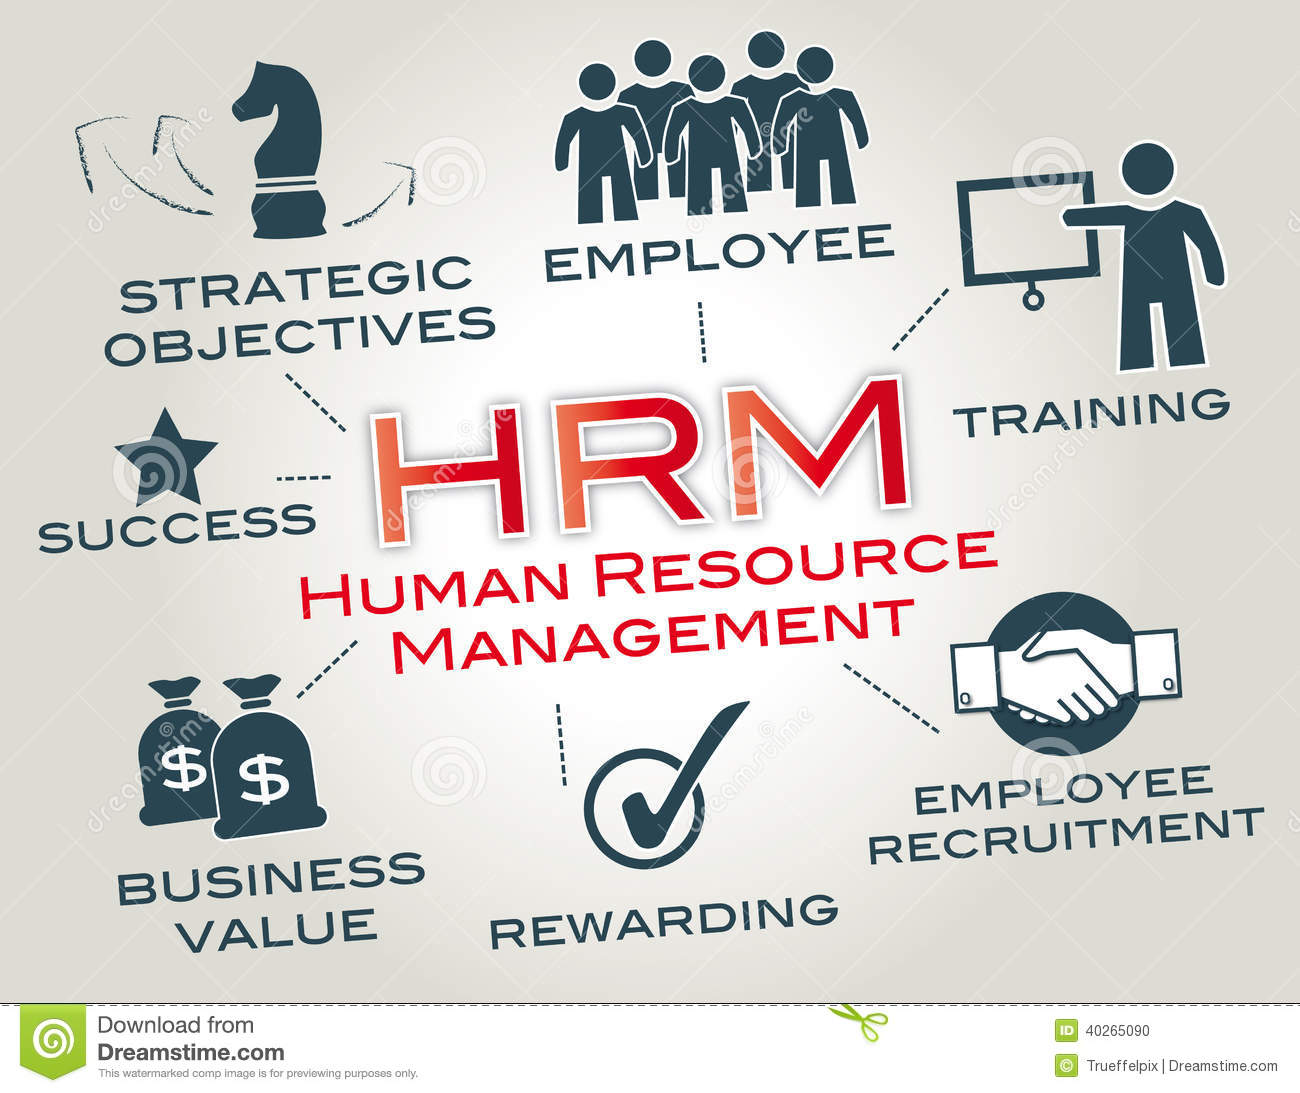 Human Resource Management Is A Function In Organizations Designed To